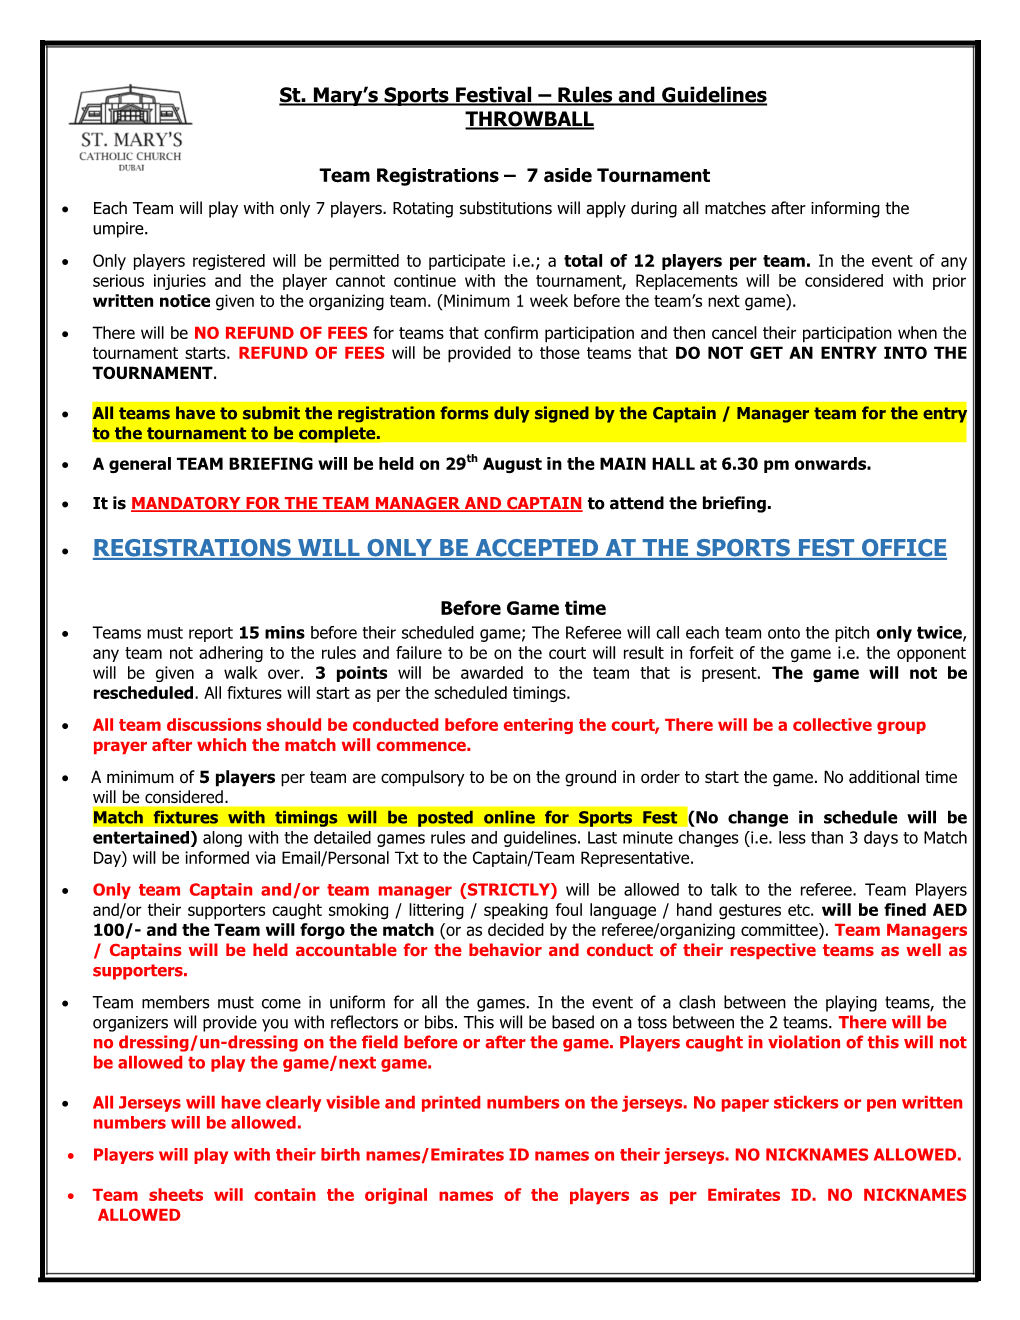 Final Womens Throwball Rules and Regulations.Pdf